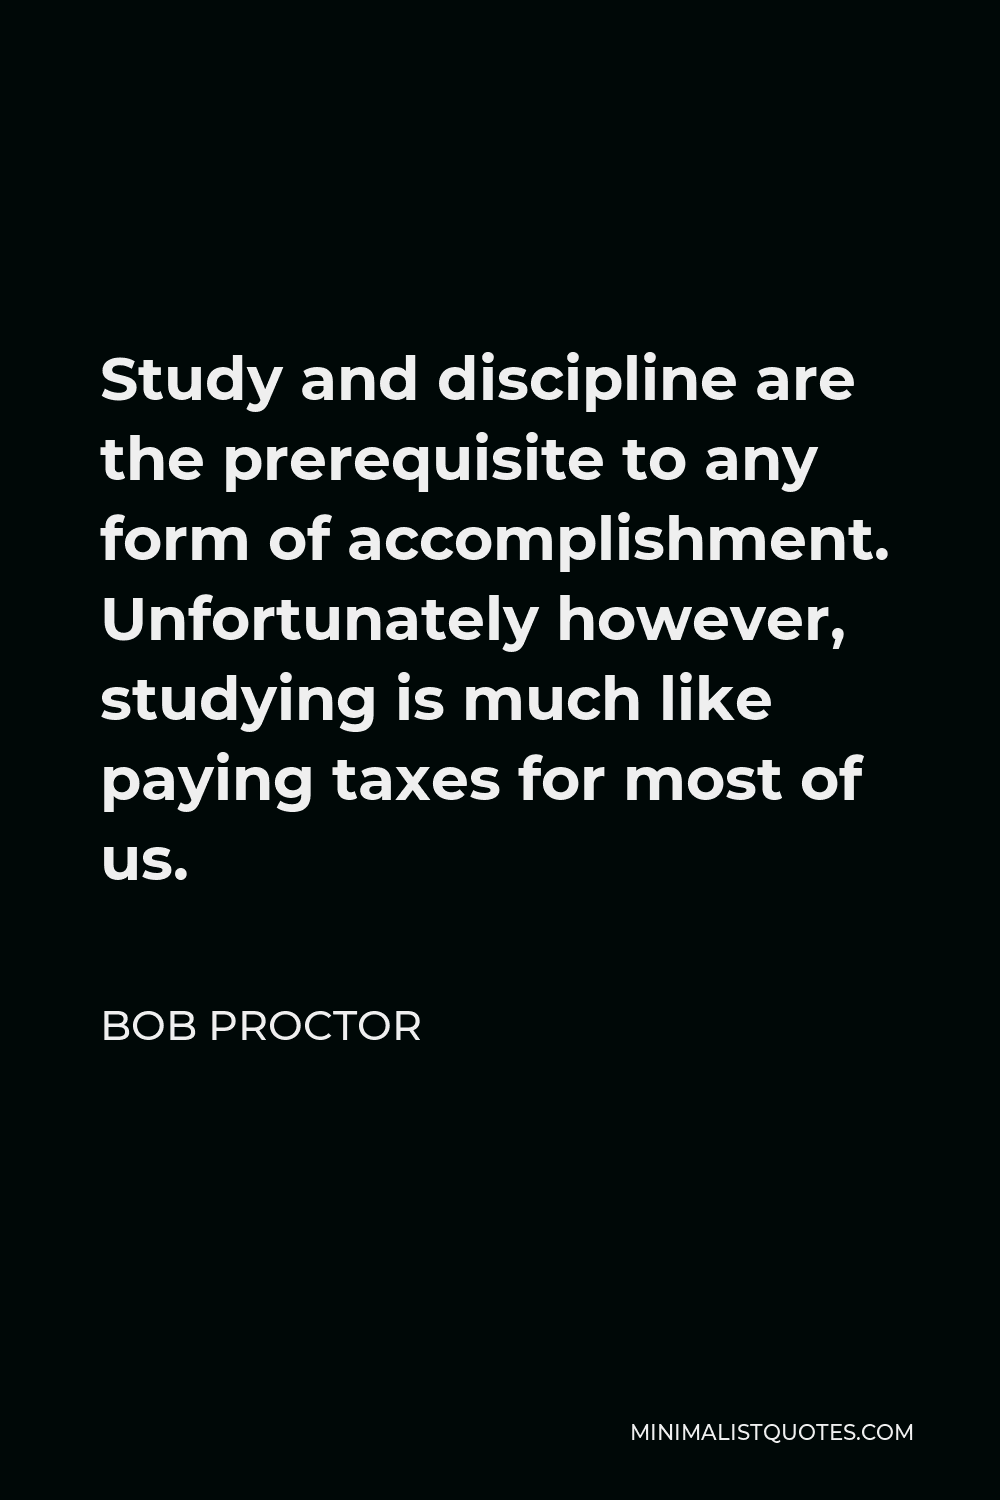 Bob Proctor Quote - Study and discipline are the prerequisite to any form of accomplishment. Unfortunately however, studying is much like paying taxes for most of us.